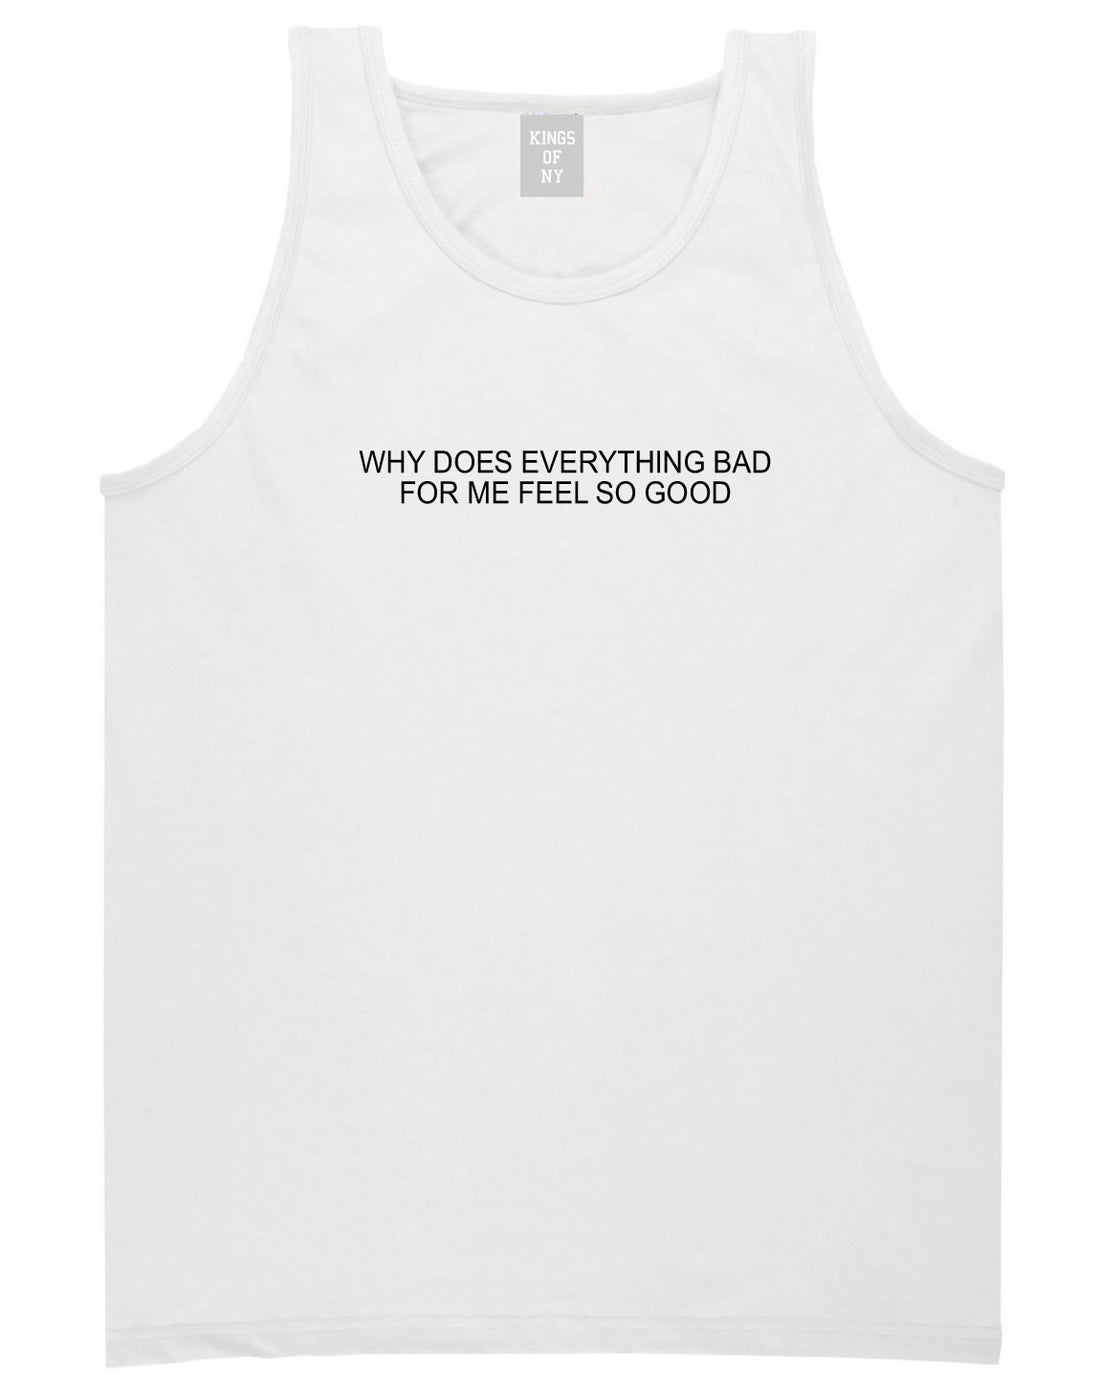 Why Does Everything Bad For Me Feel So Good Mens Tank Top Shirt White